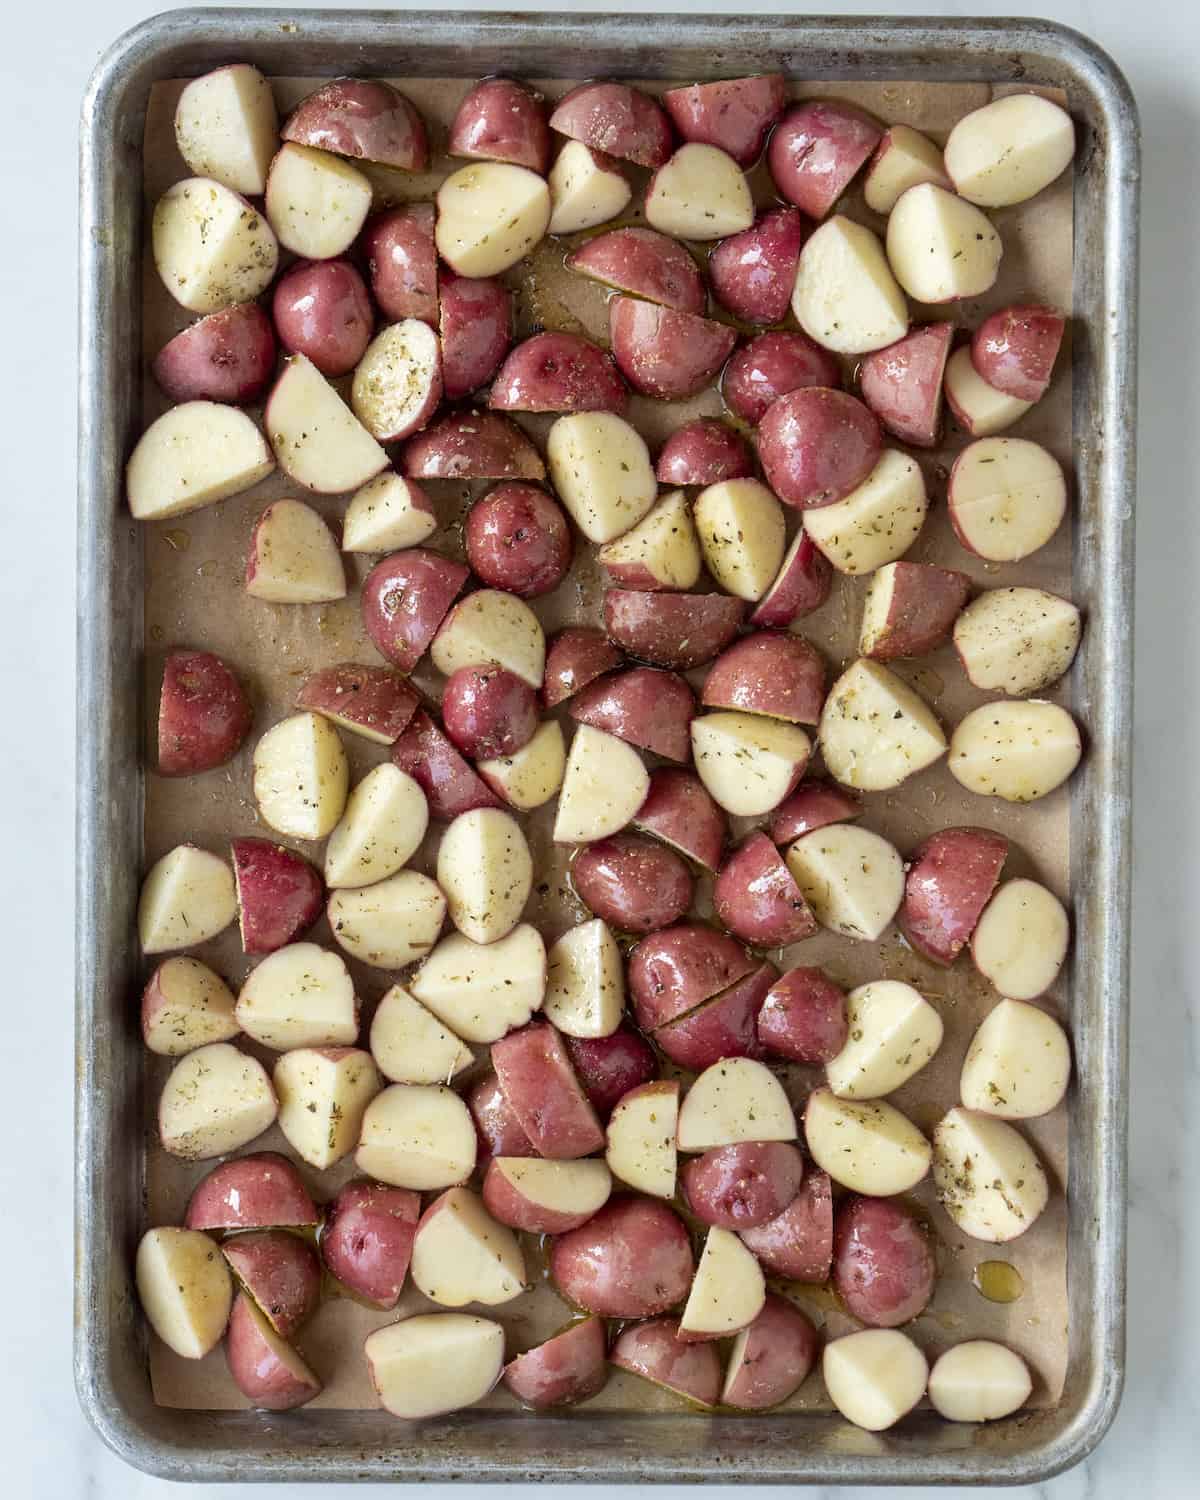 Quartered potatoes on a baking sheet drizzled with olive oil salt and pepper.  